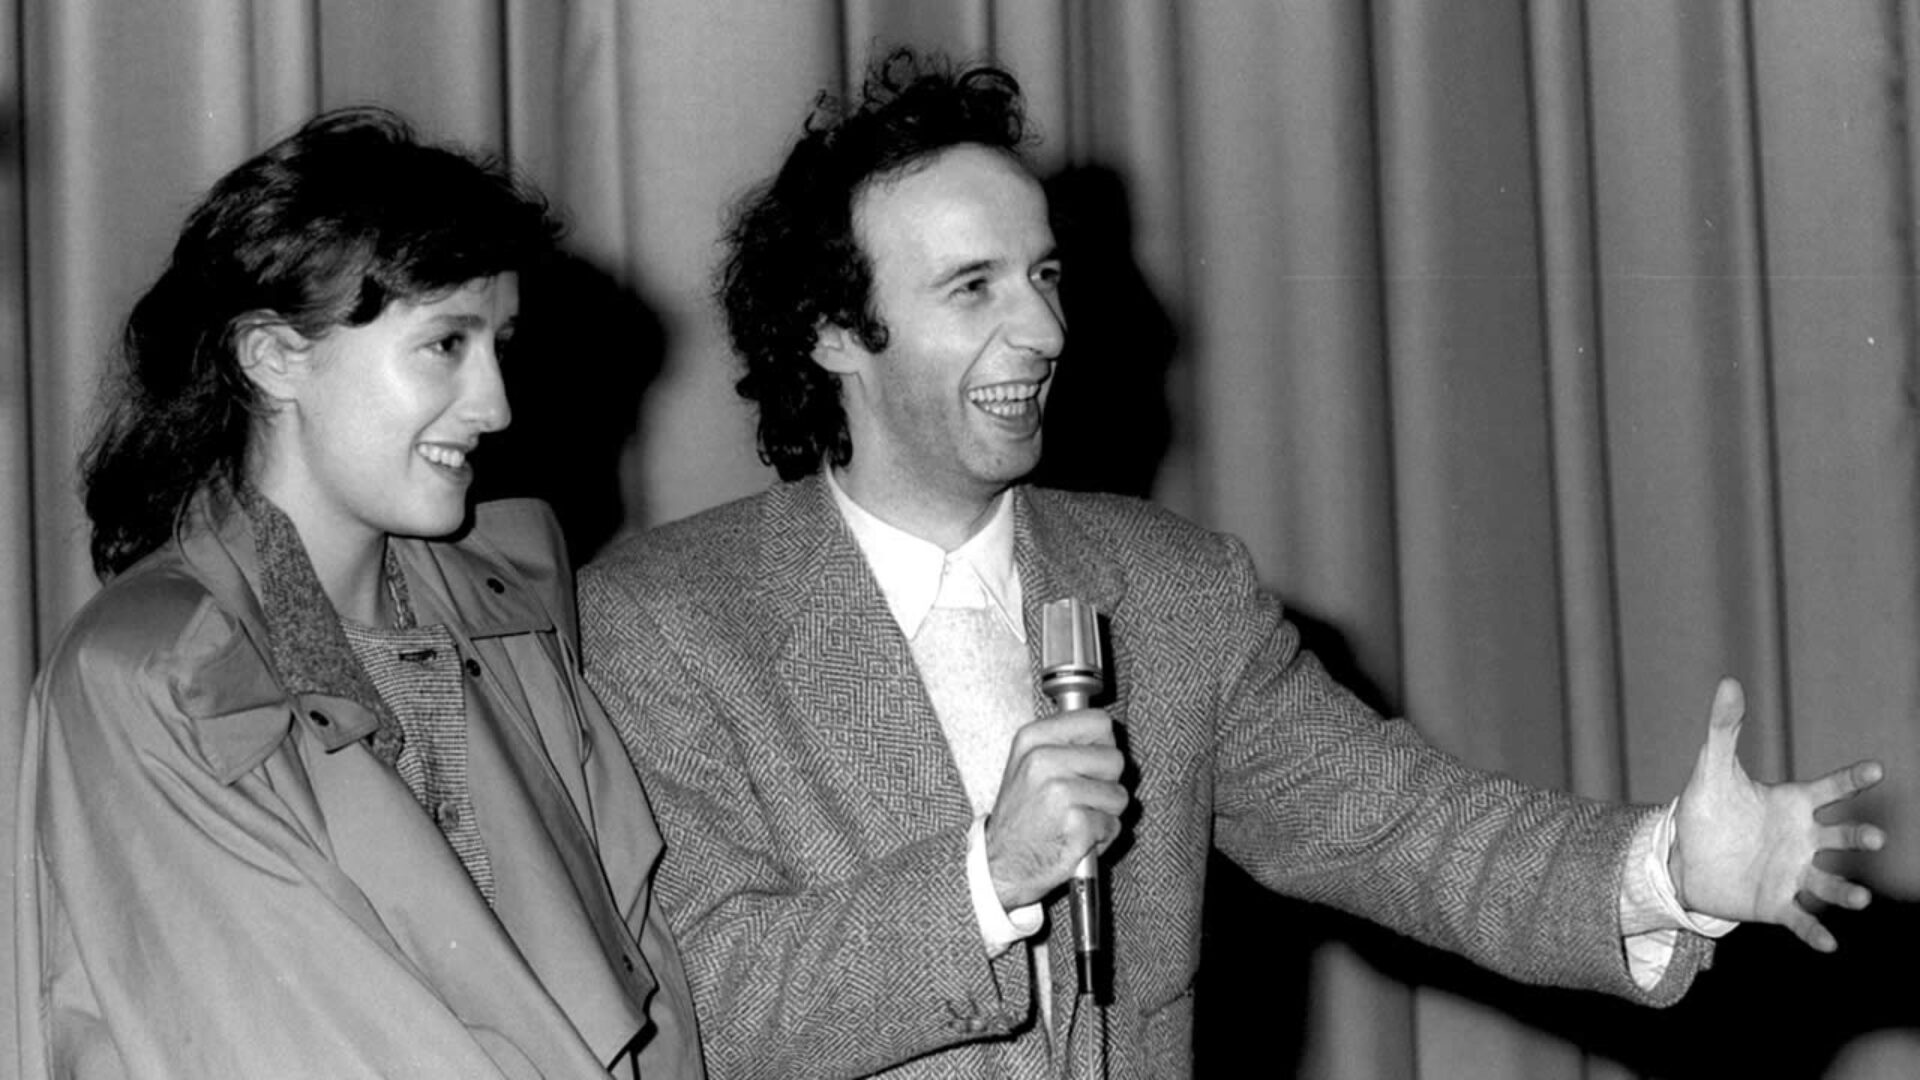 HoF 1986: Nicoletta Braschi and Roberto Benigni after the premiere of Jim Jarmusch’s DOWN BY LAW